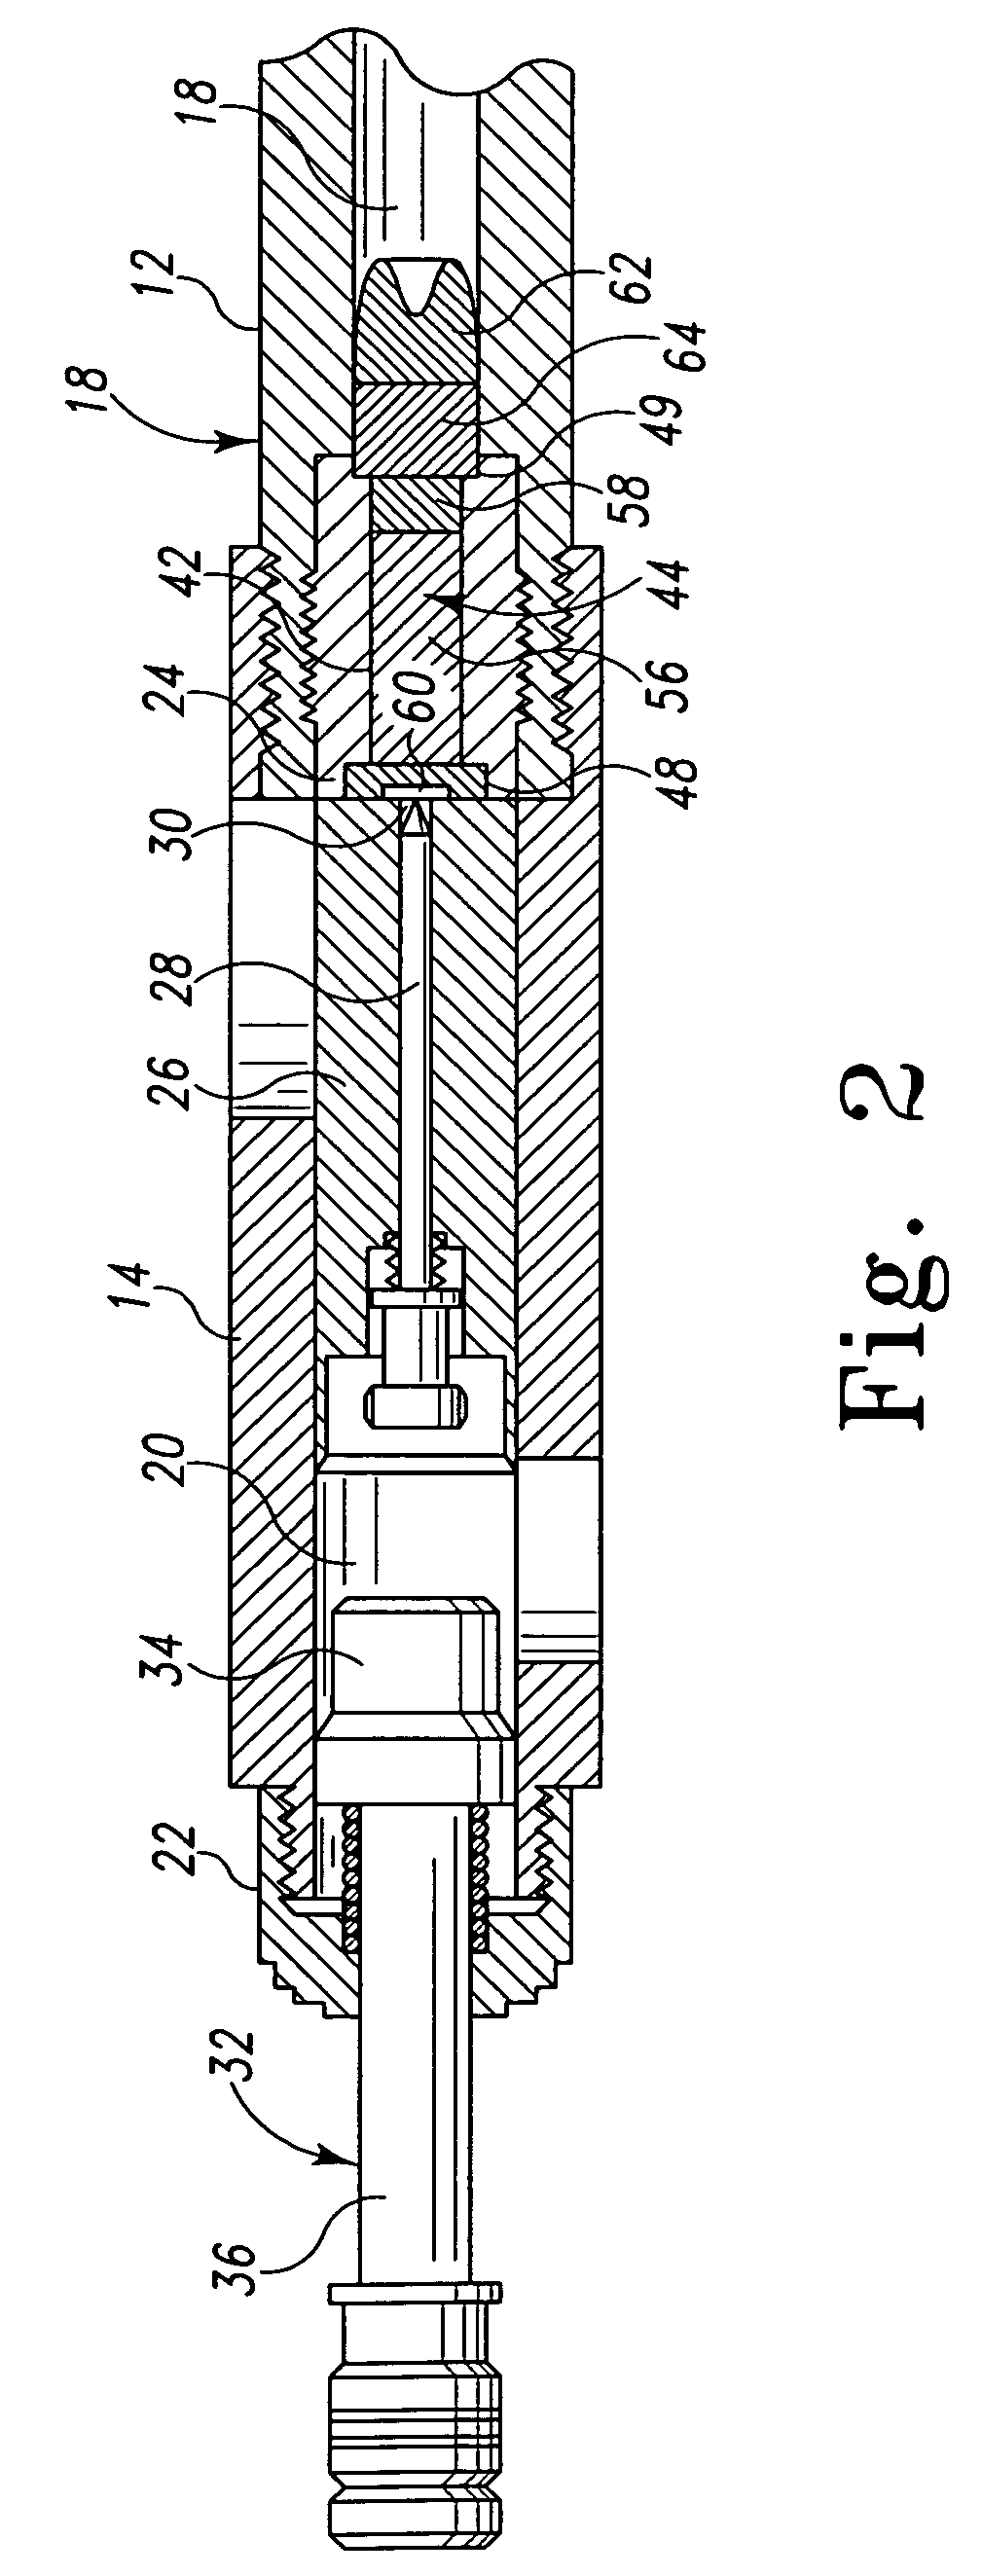 System for loading a muzzle-loading firearm with smokeless or black powder